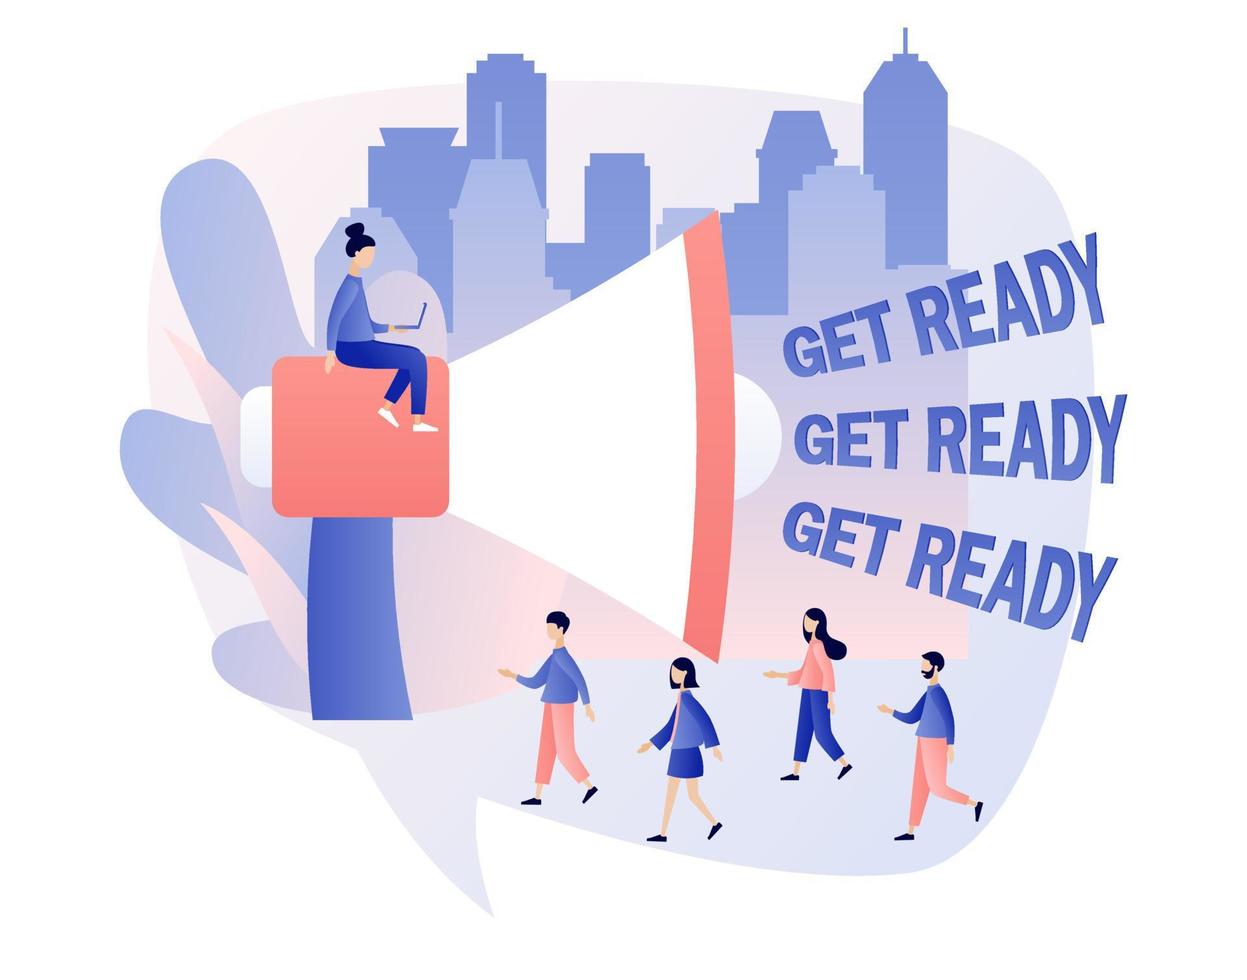 Get ready - signis heard from a large megaphone and tiny people that ready for event or opening. Modern flat cartoon style. Vector illustration on white background